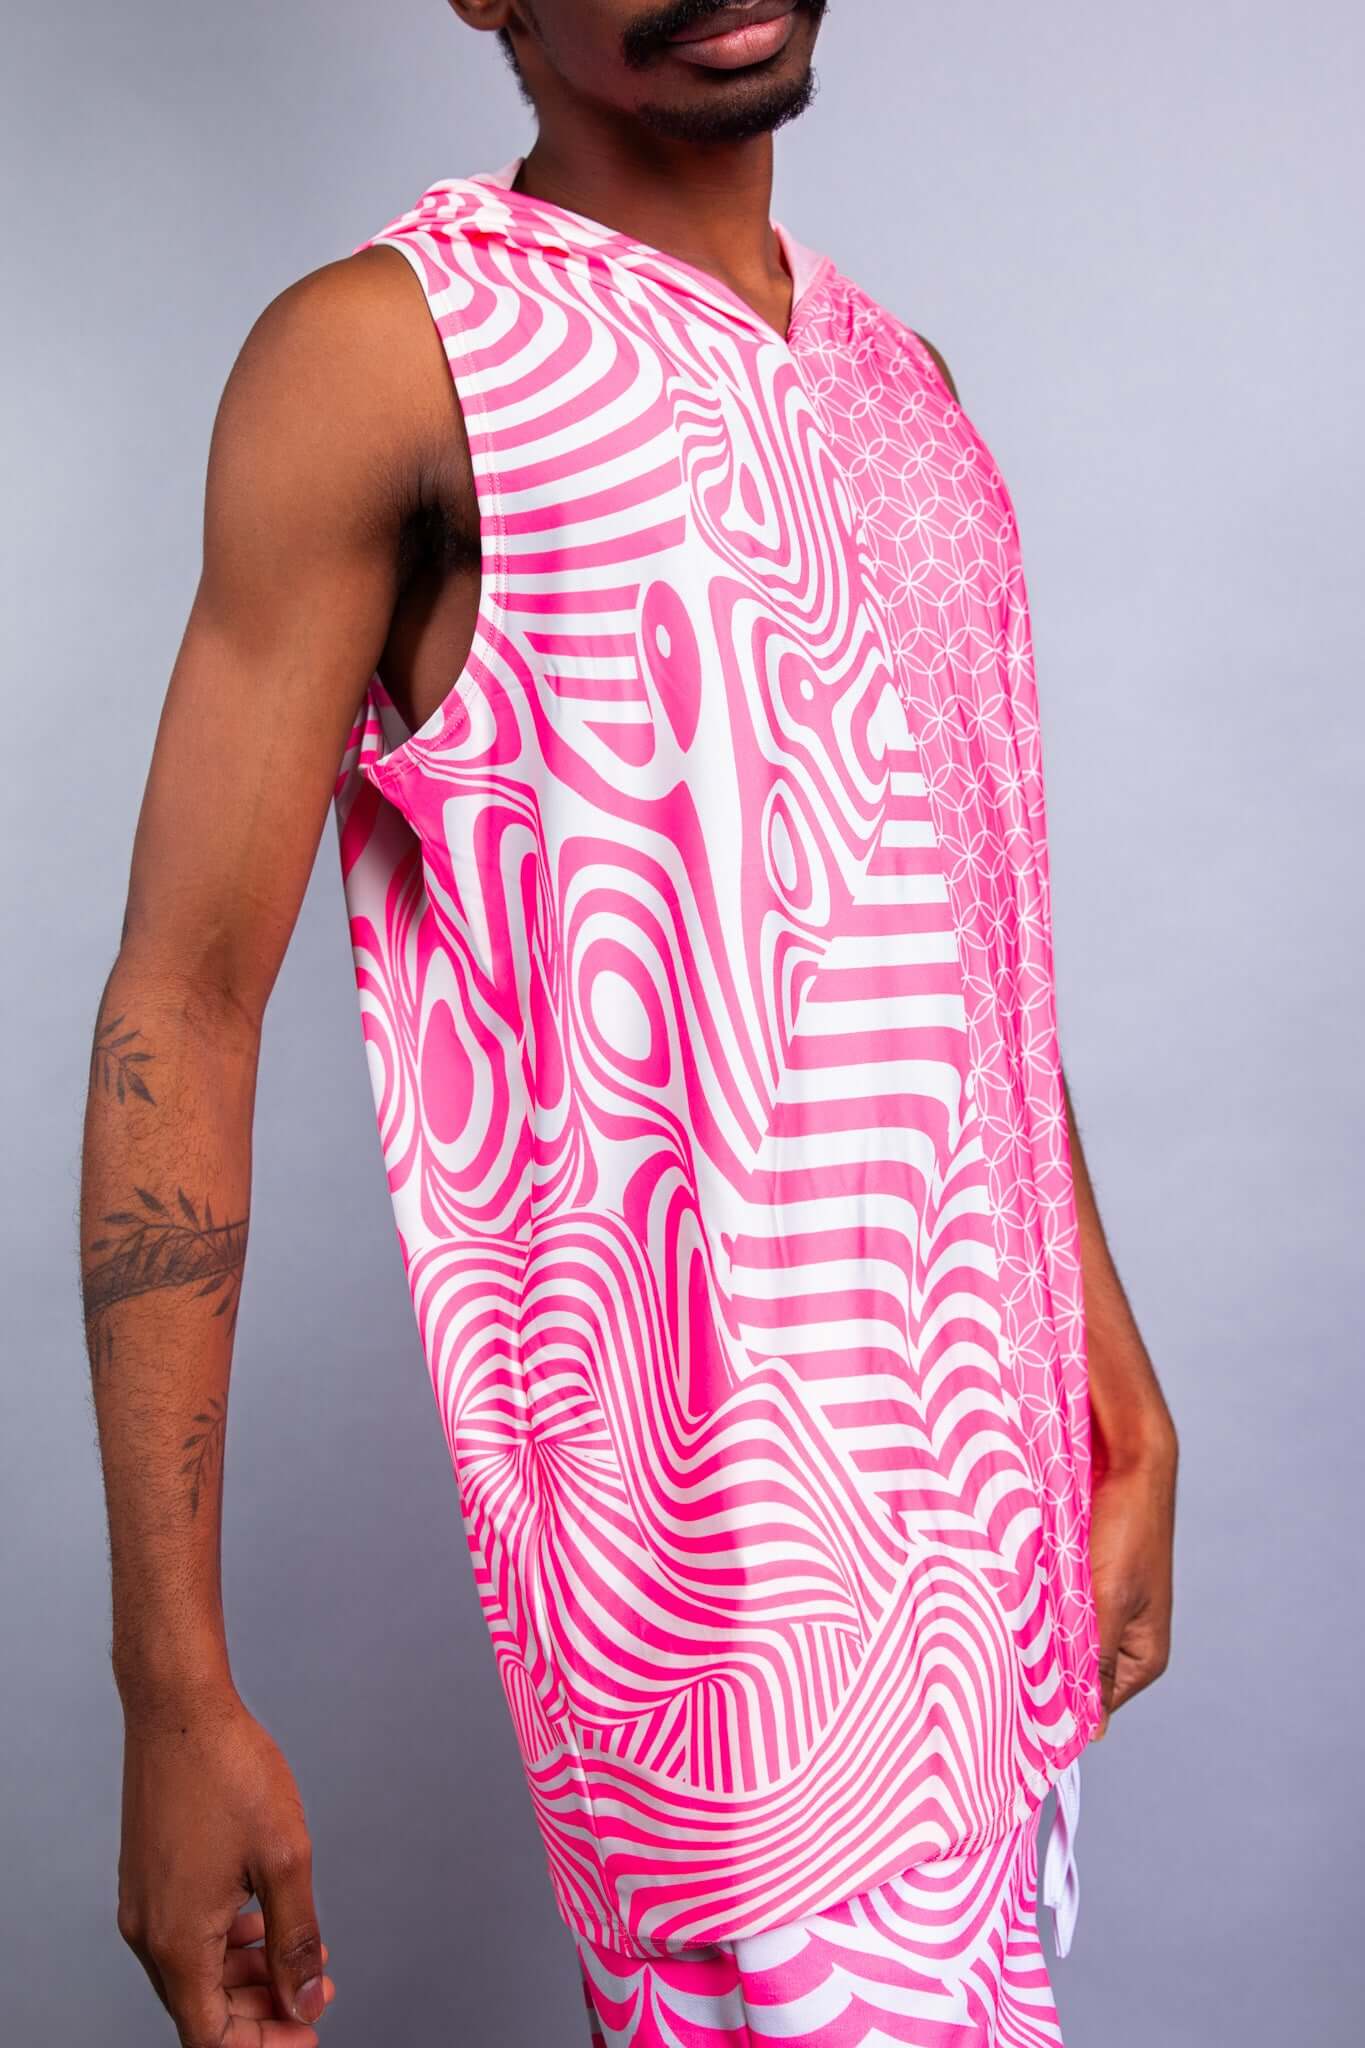 Electricity Unisex Hooded Tank Top Freedom Rave Wear Size: Small